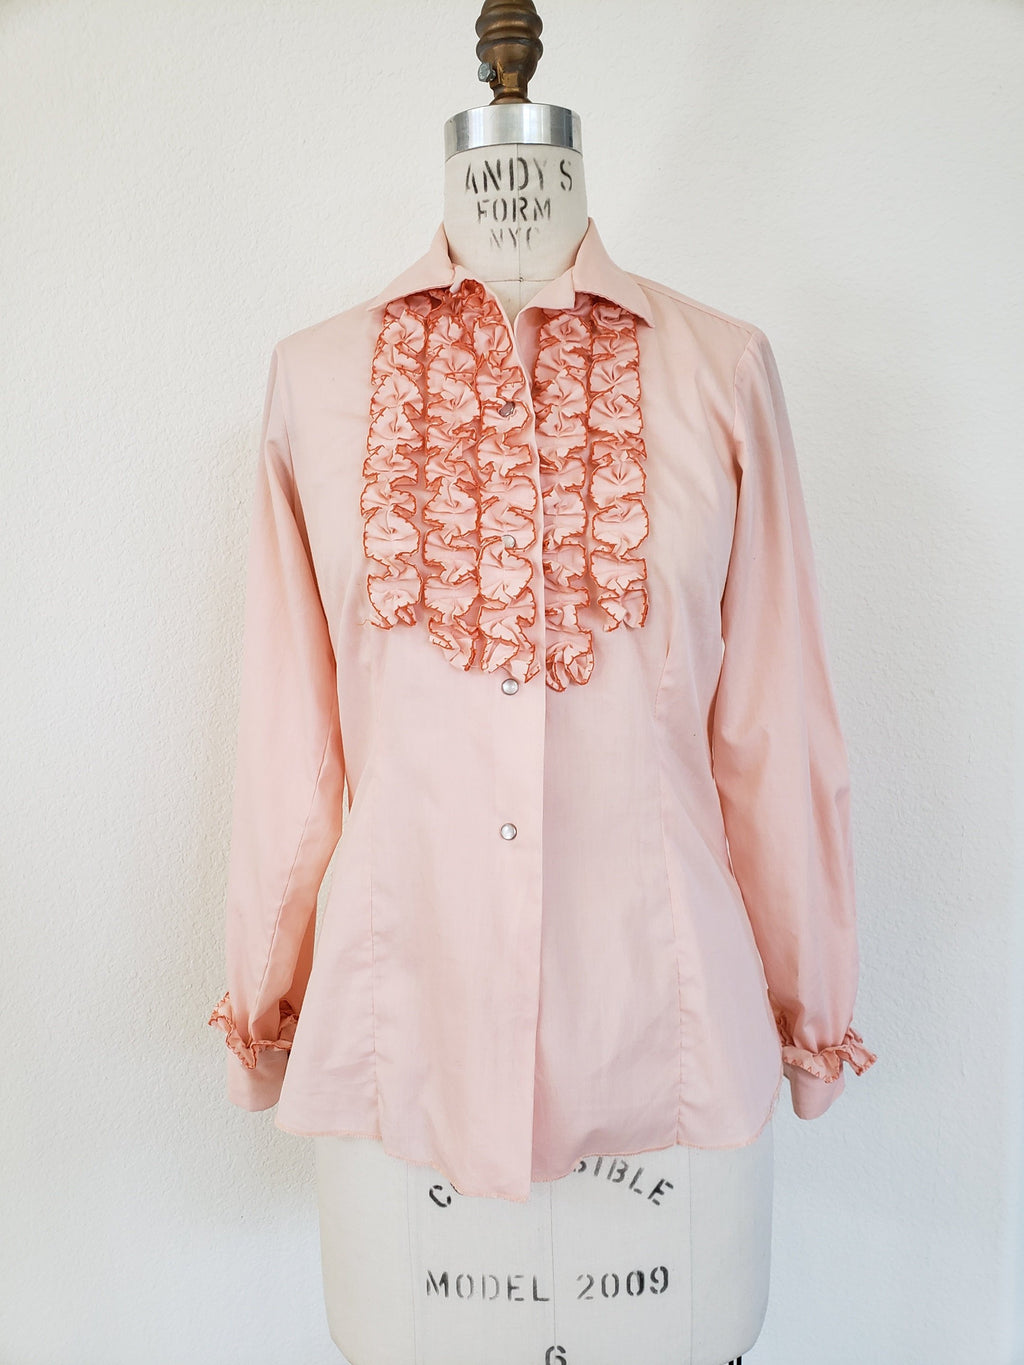 Vintage 70s Pink Ruffle Blouse - ChicCityVintage